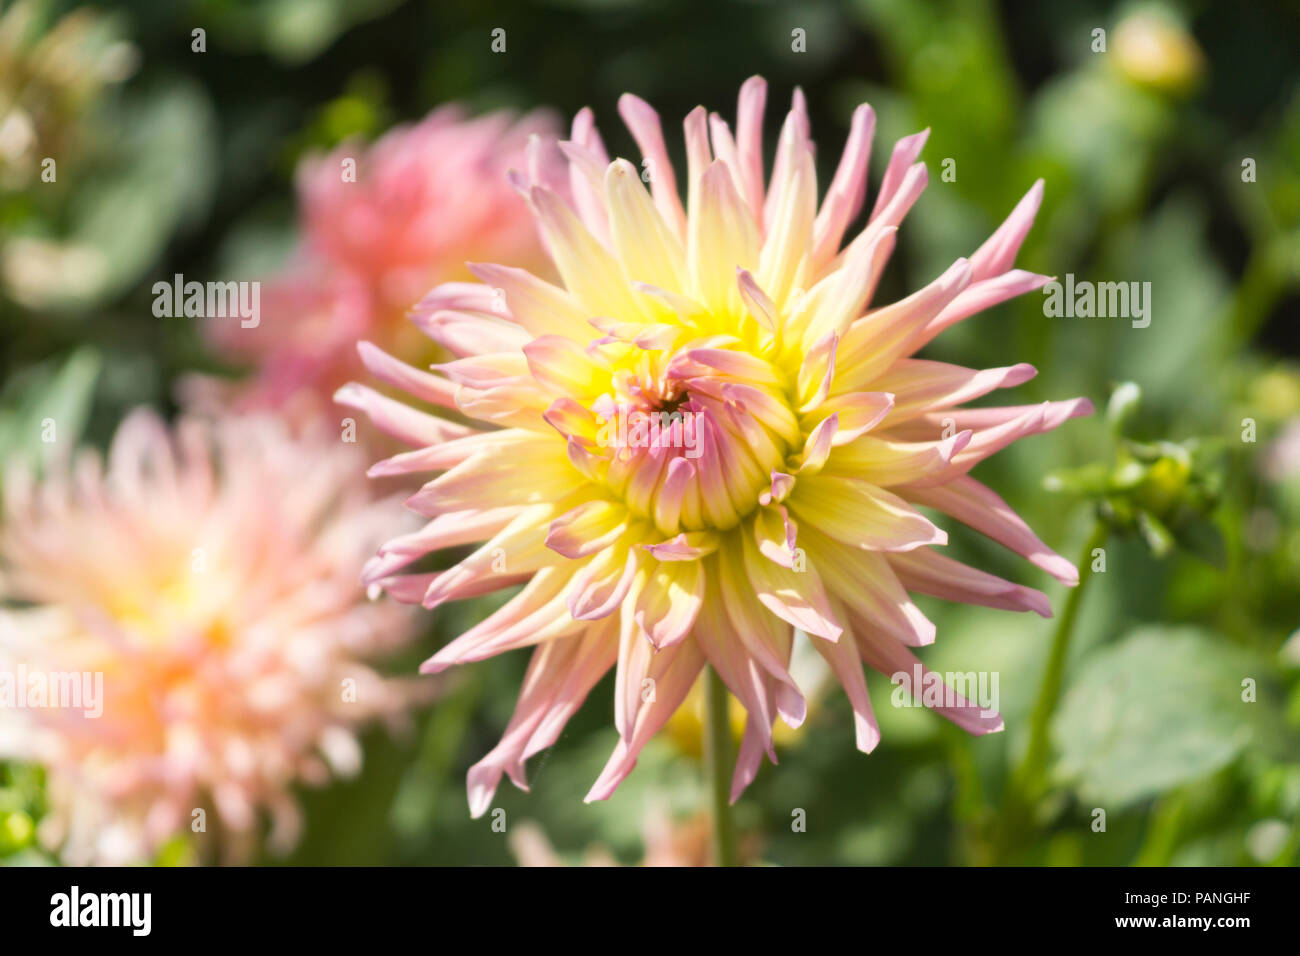 A beautiful example of an Alfred Grille Dahlia (Cactus Dahlia - family Asteraceae) with a two tone pink and yellow 'double bloom', Lower Austria Stock Photo